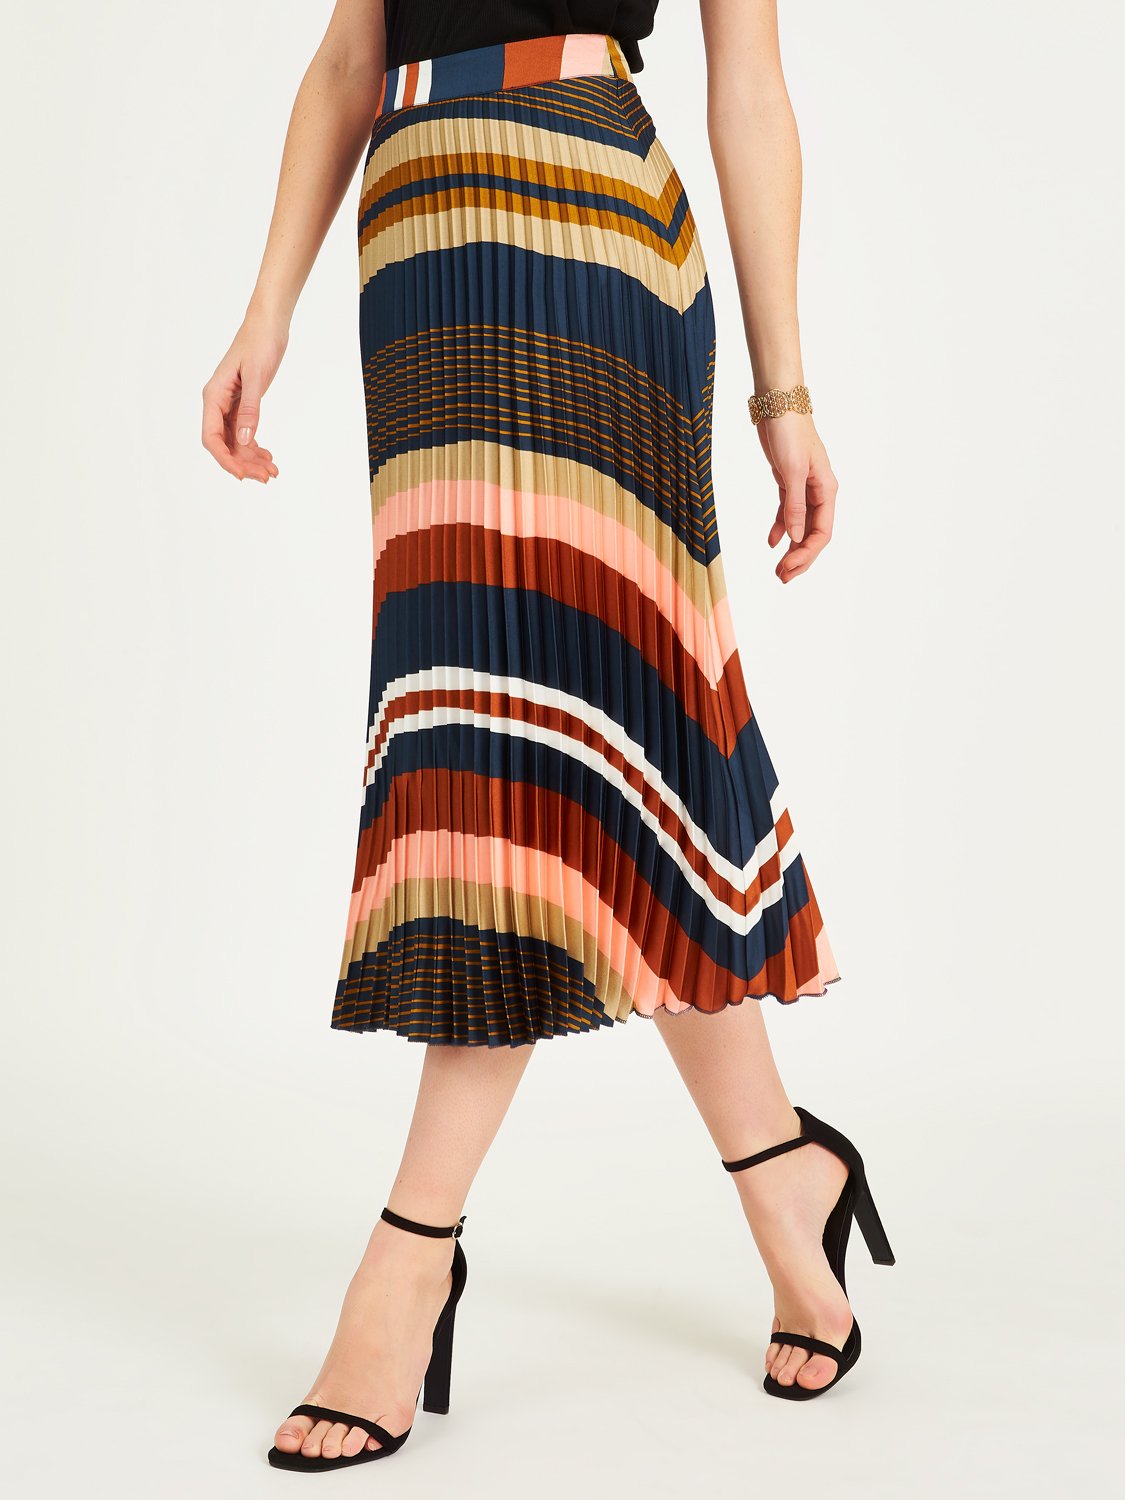 Multicolored Horizontal Striped Pleated Skirt